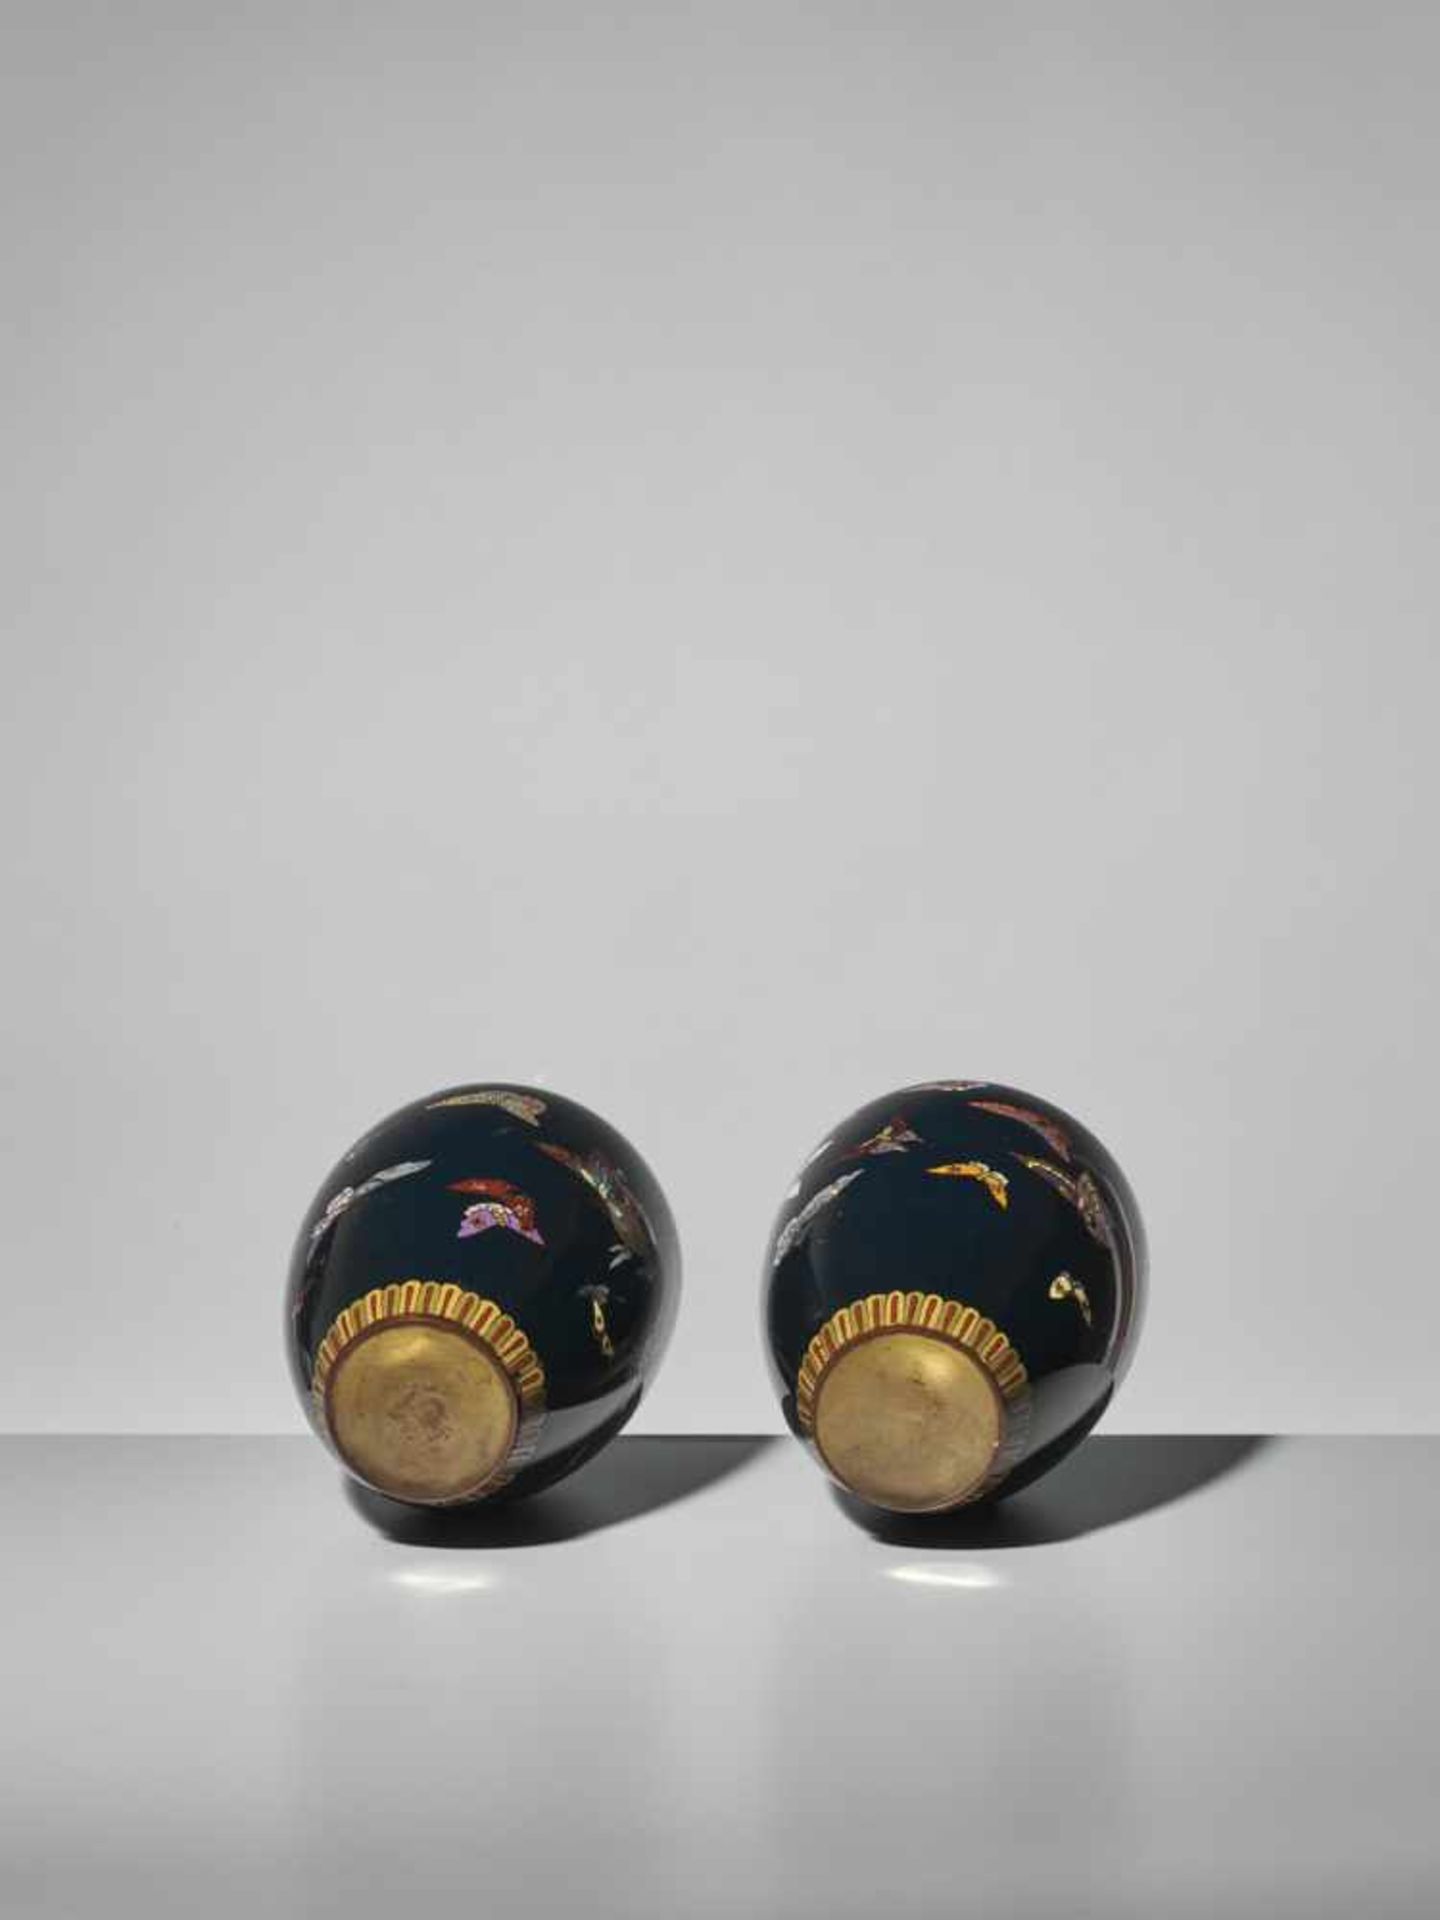 A PAIR OF CLOISONNE ENAMEL VASES WITH BUTTERFLIES - Image 6 of 6